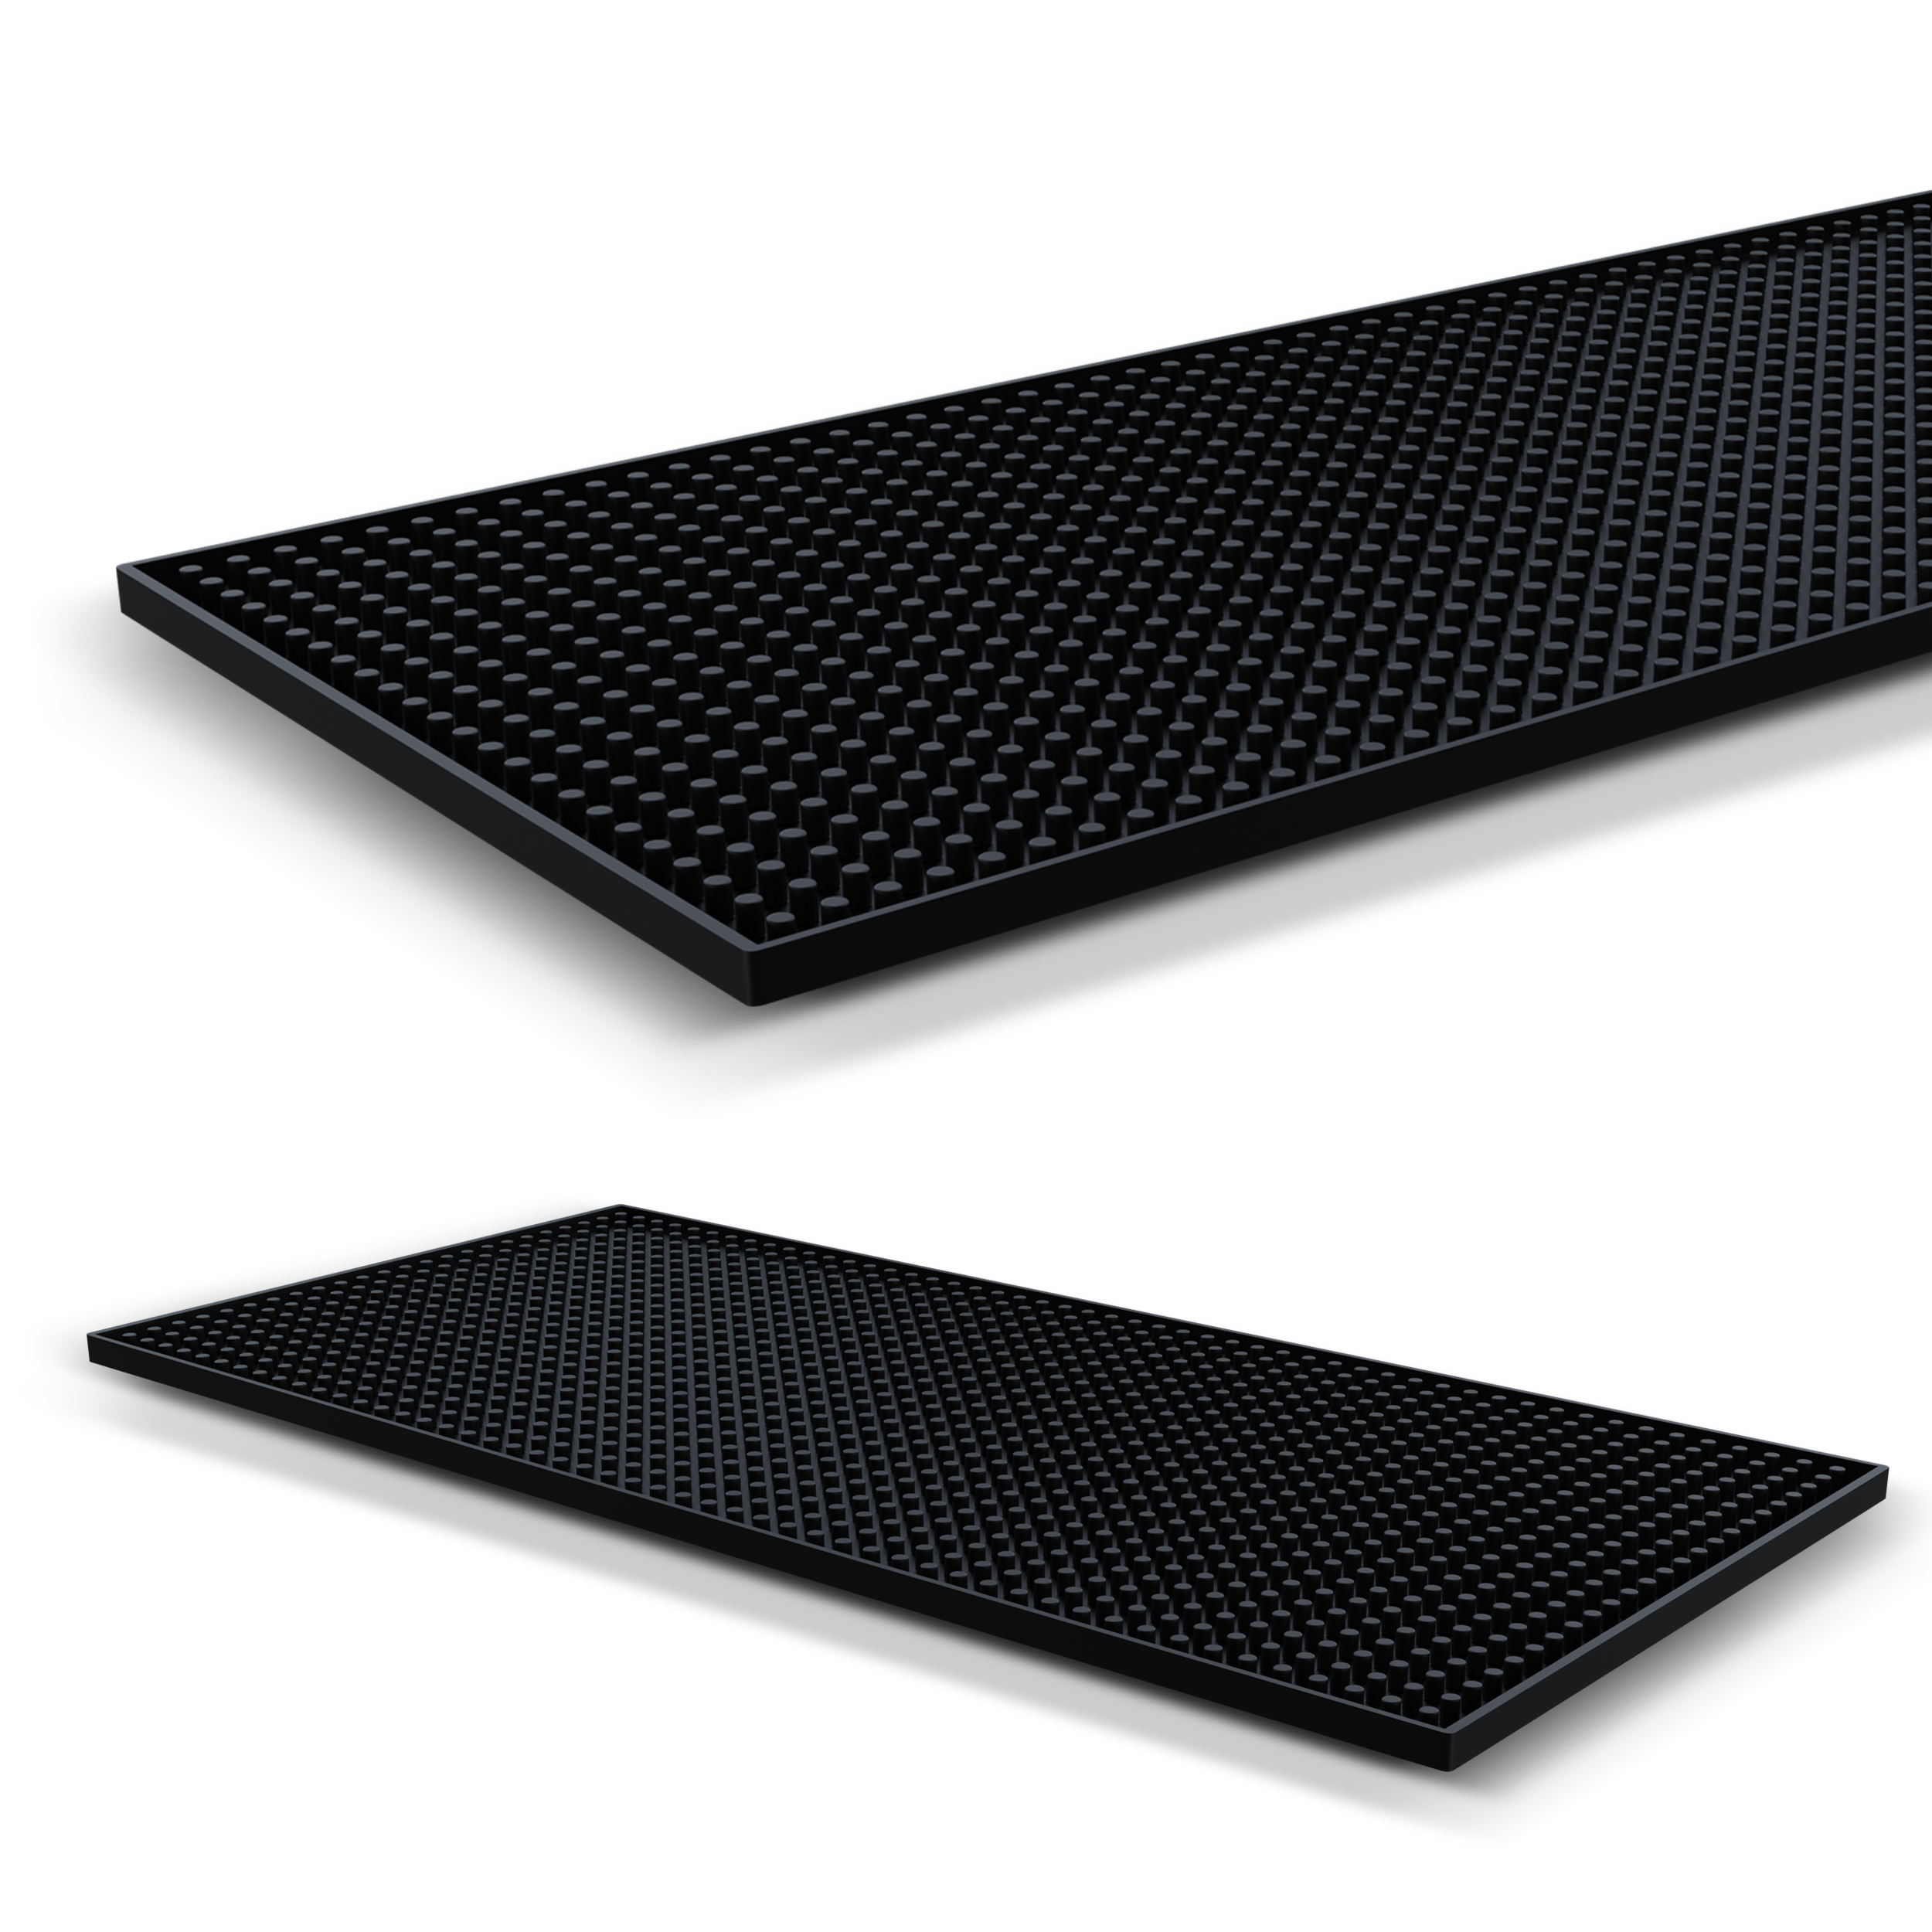 Featured image for “6” x 12” – 1 Piece Black Shaker Mat (SHAMAT) – Durable and Environmental Professional Bar Mat”